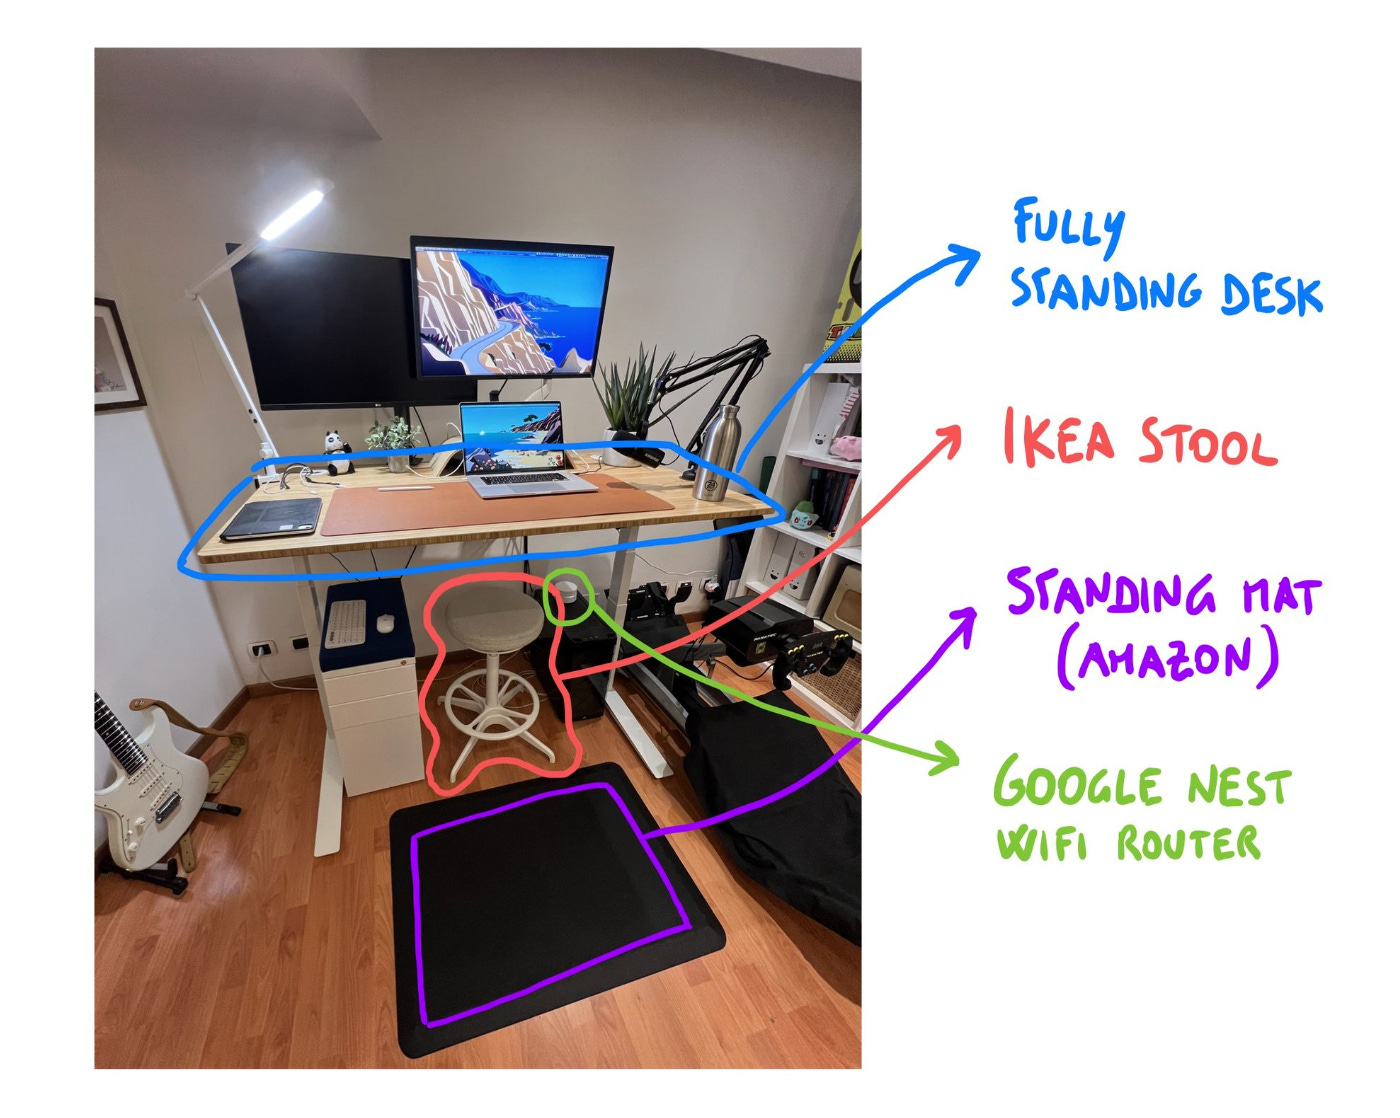 My Desk Setup and Accessories ? - by Luca Rossi